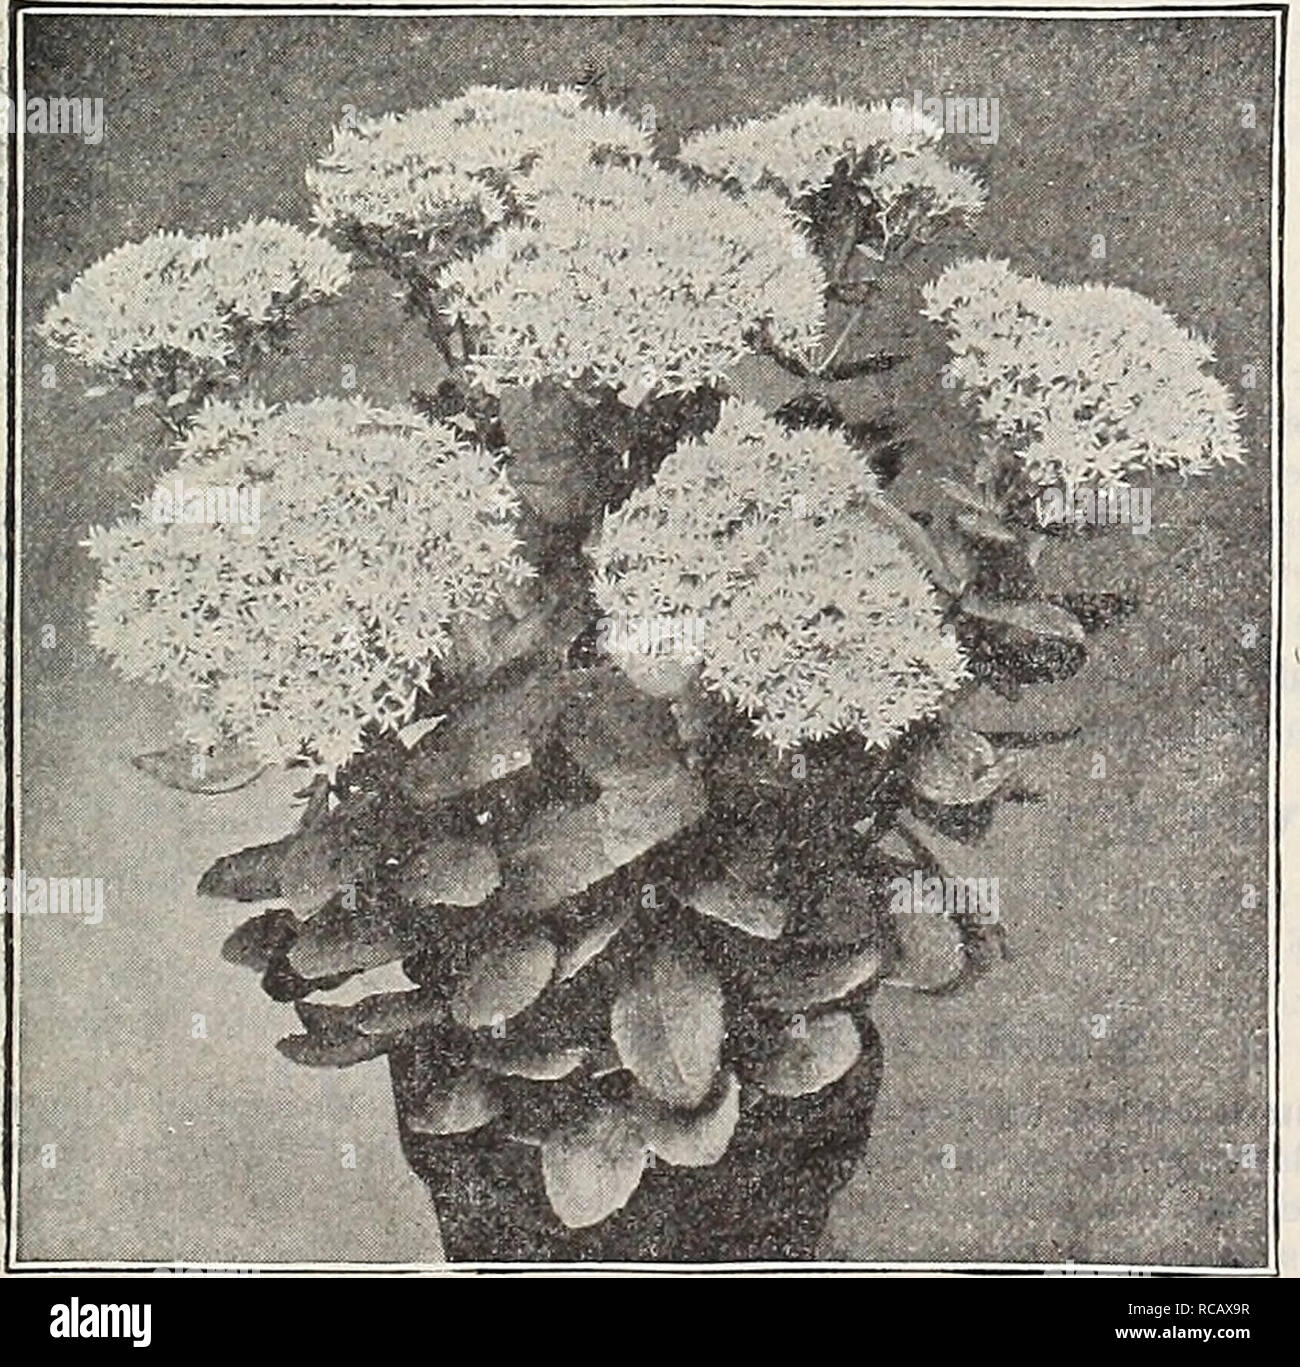 . Dreer's garden book : seventy-third annual edition 1911. Seeds Catalogs; Nursery stock Catalogs; Gardening Equipment and supplies Catalogs; Flowers Seeds Catalogs; Vegetables Seeds Catalogs; Fruit Seeds Catalogs. Scabiosa Caucasica (offered on page 238).. Sebum SpECTABn-is Atropurpurea. SISYRINCHIUM (Satin Lily, or Blue-eyed Grass). Bermudianum. A pretty, early spring and fall-flowering plant, with blue flowers and grass-like foliage; 10 inches. 15 cts. each; $1.50 per doz. SMILACINA (False Solomon's Seal). Racemosa. An attractive native plant, and a splendid subject for the border both for  Stock Photo